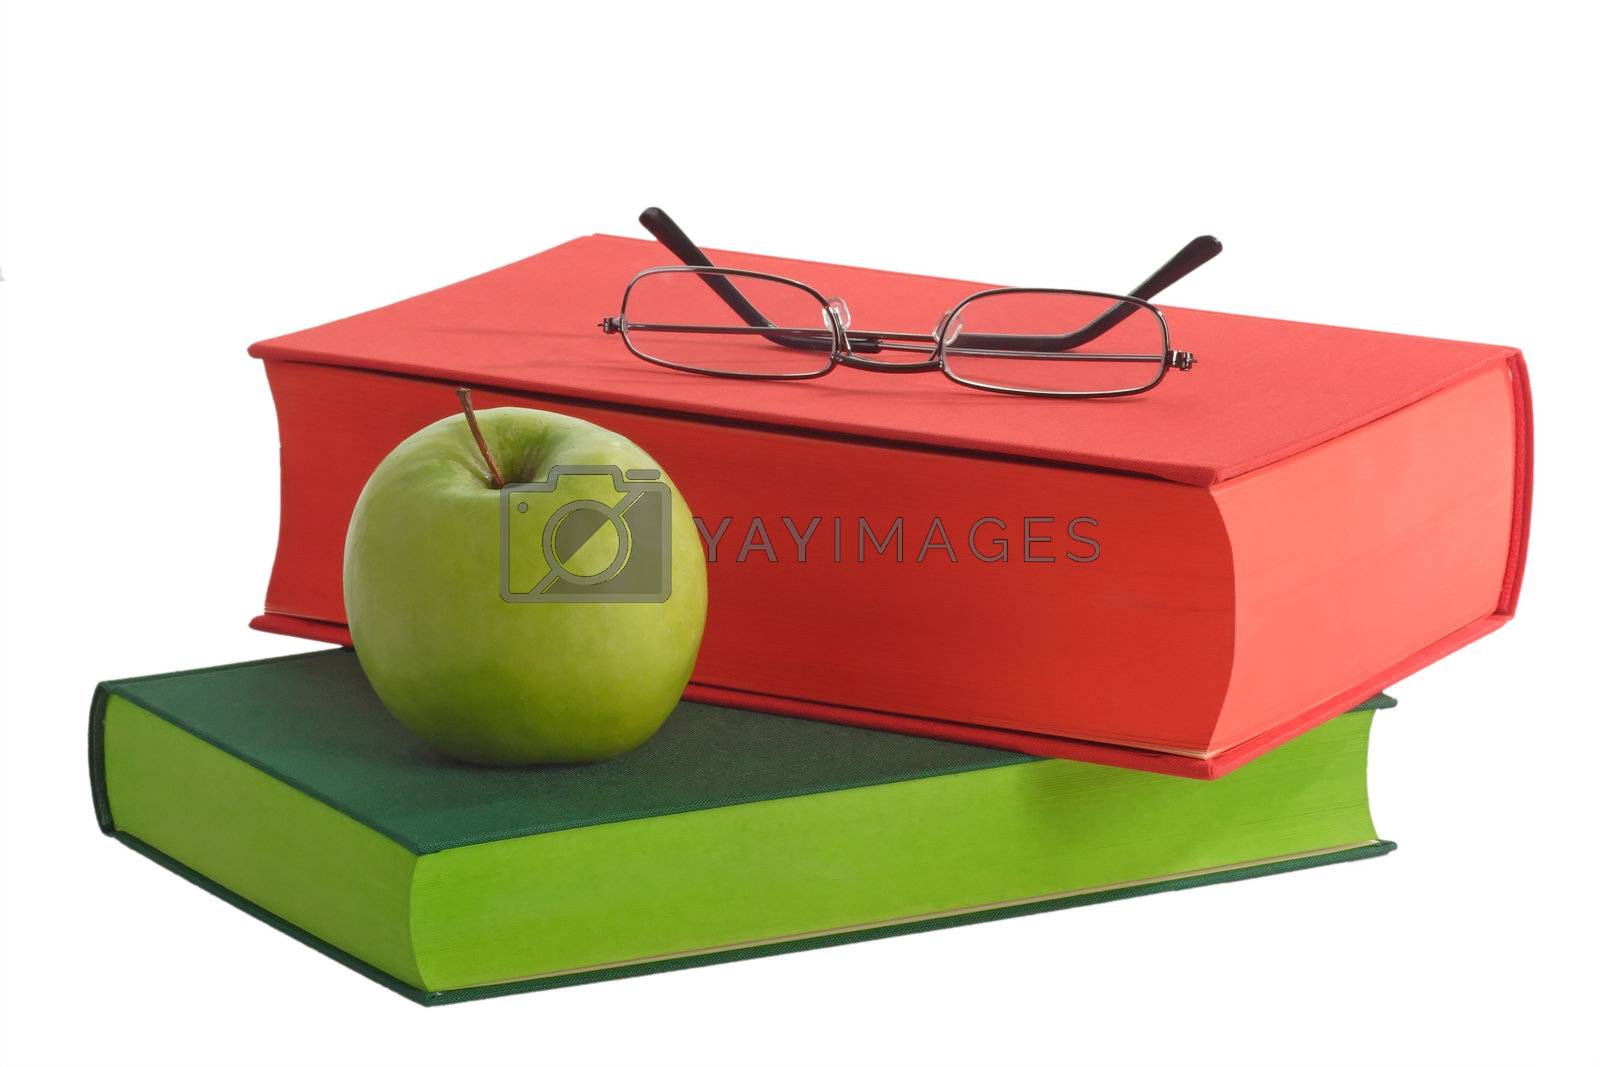 Royalty free image of Reading Glasses by Teamarbeit